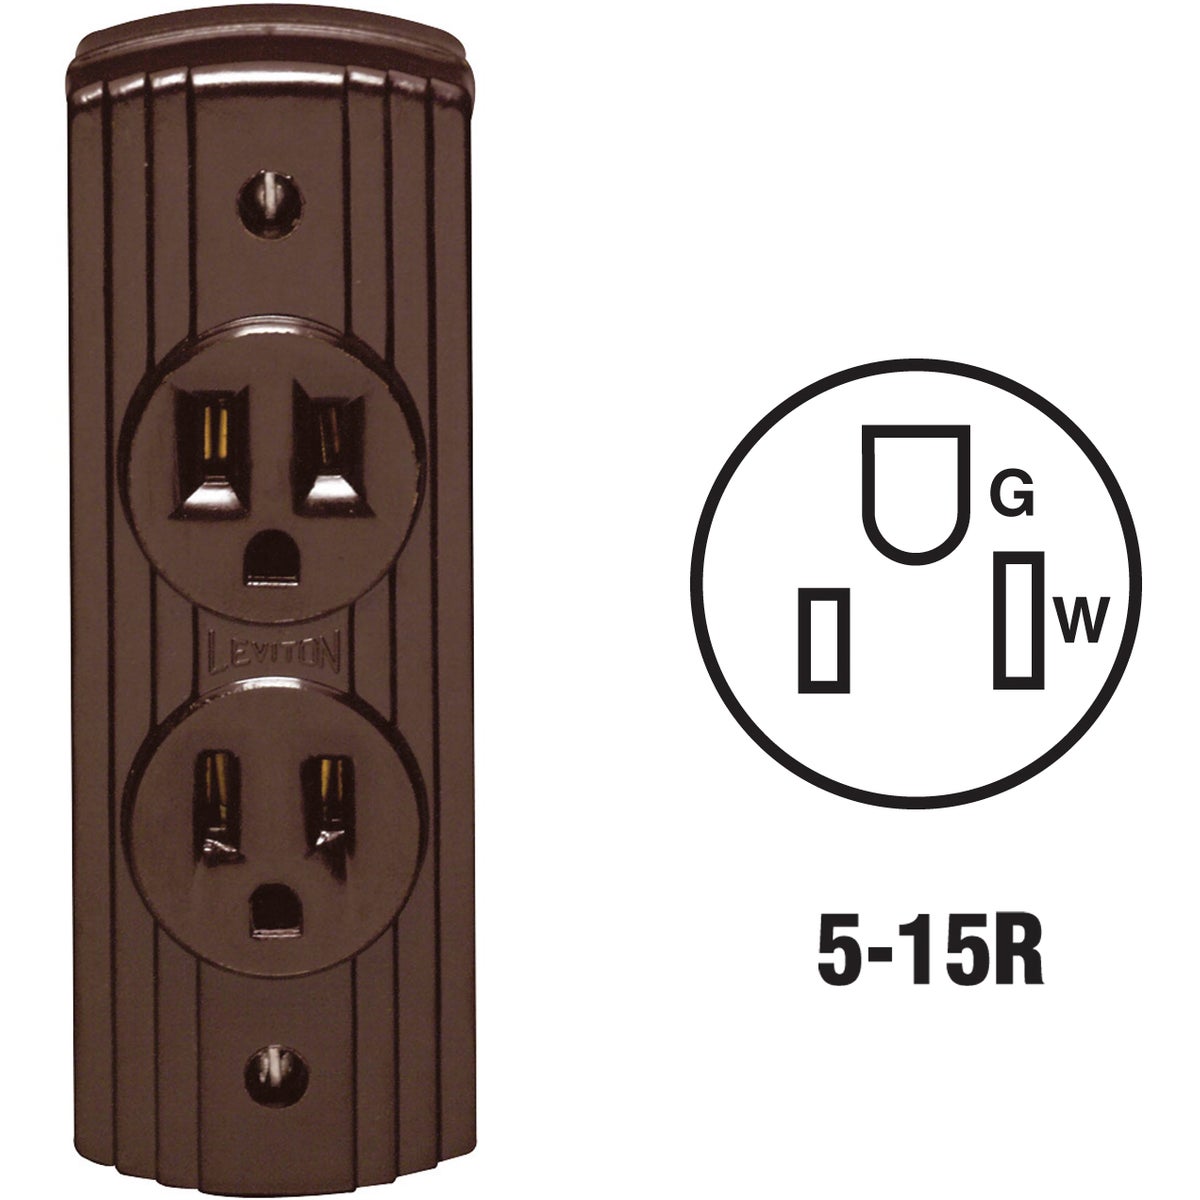 Item 525097, Surface mounted power outlet. 15amp/125volt. For use with 2 or 3-wire, No.